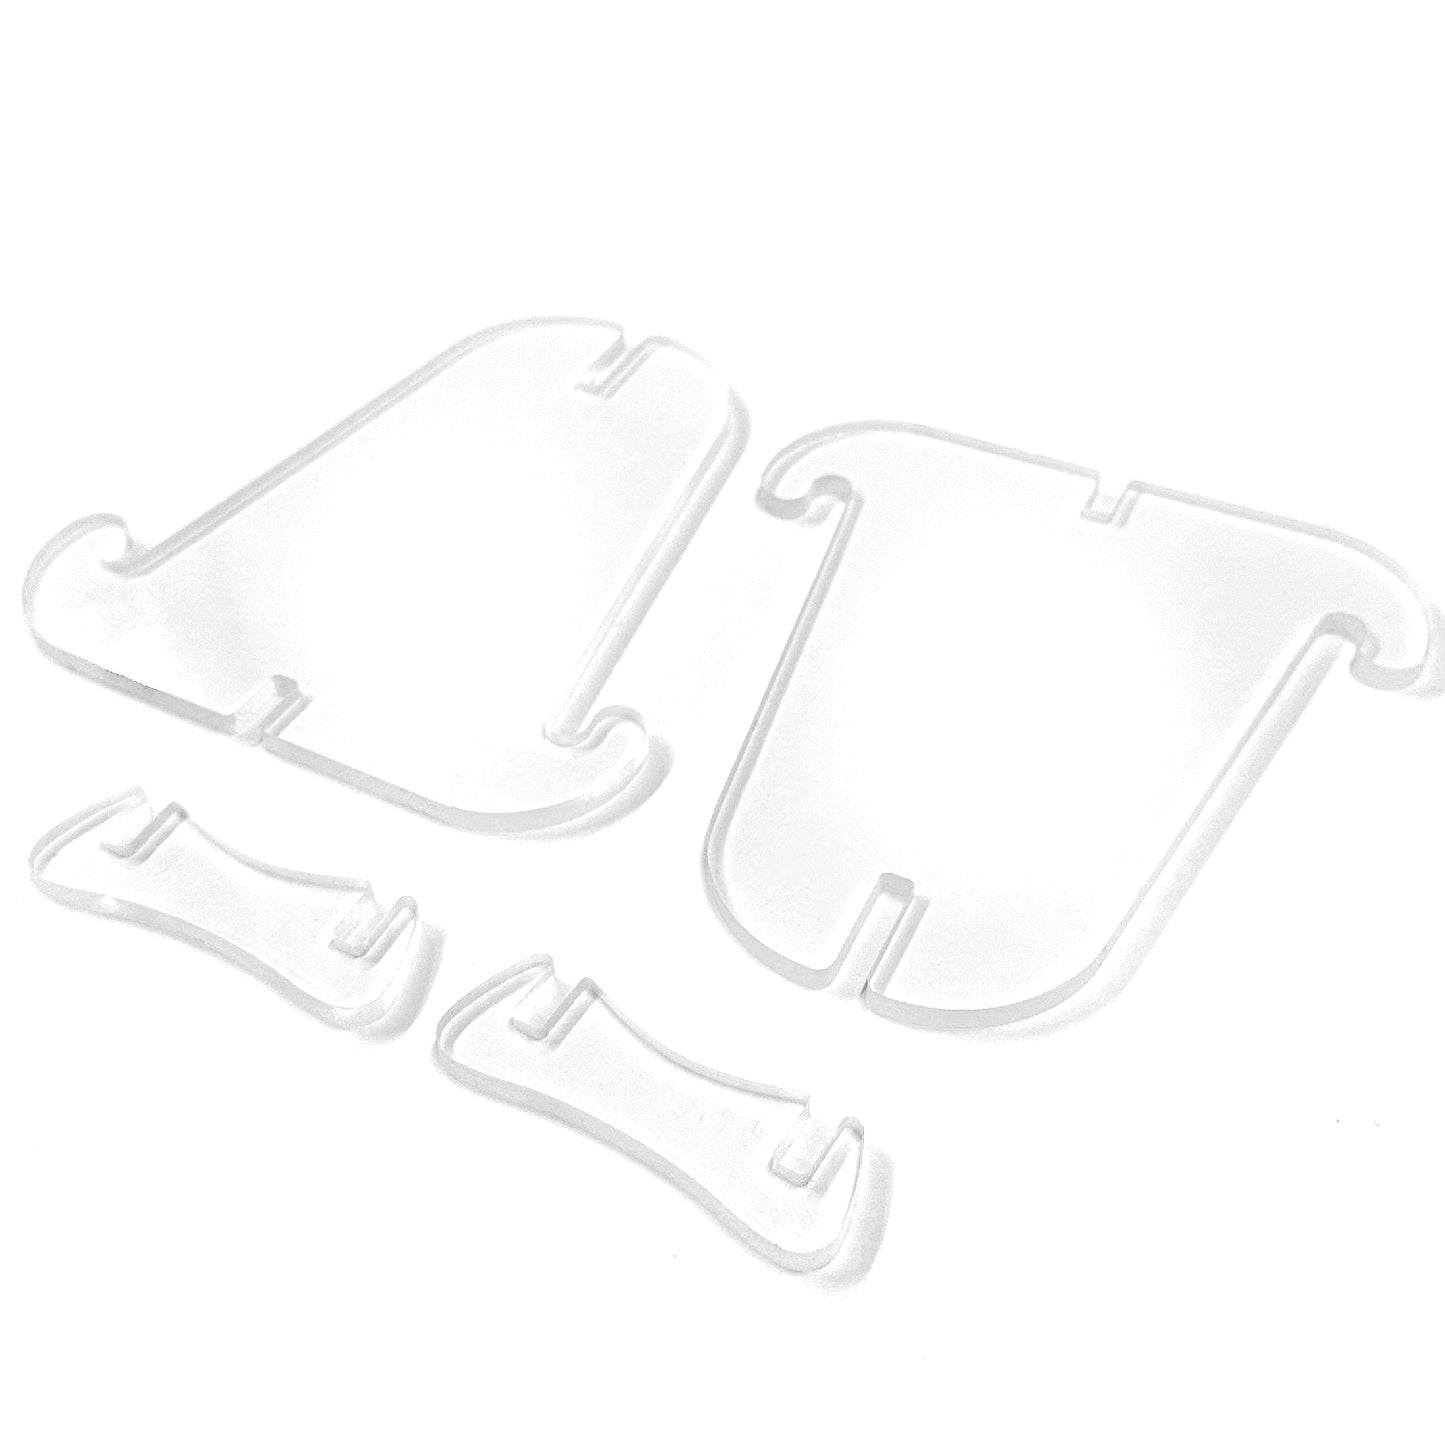 Clear Acrylic Stand Assembly Type - SB4SS x 2 set